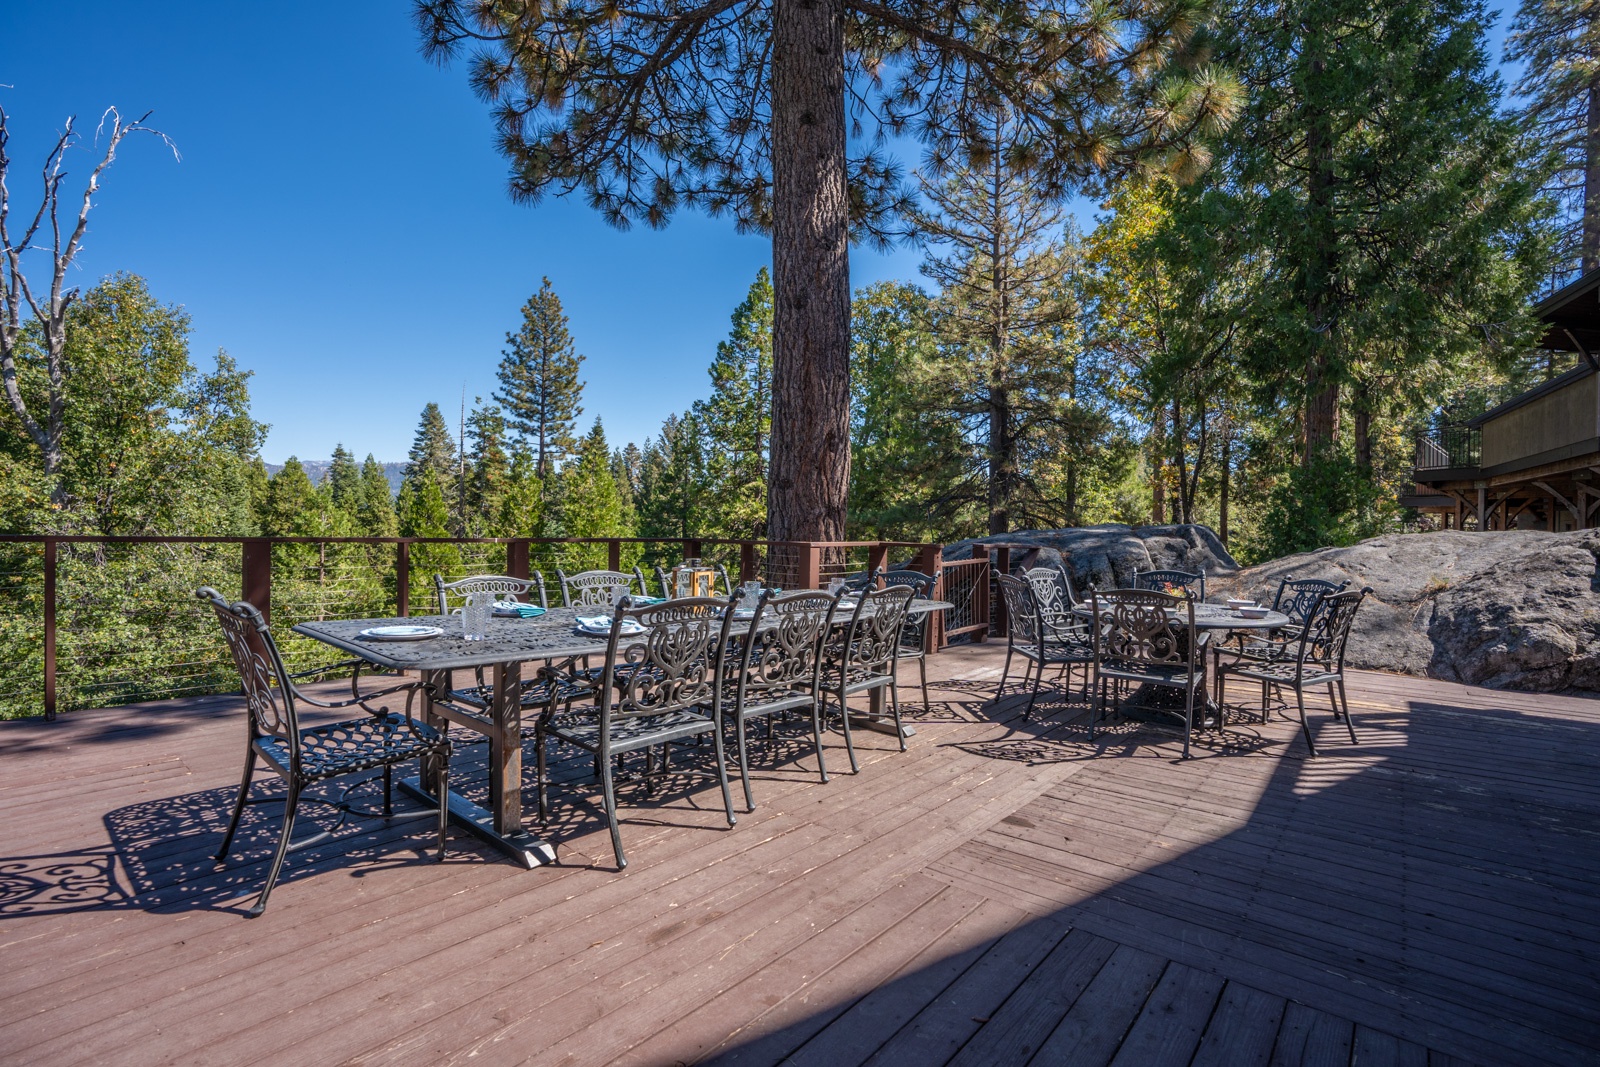 Enjoy meals & visiting together outdoors on the incredible back deck